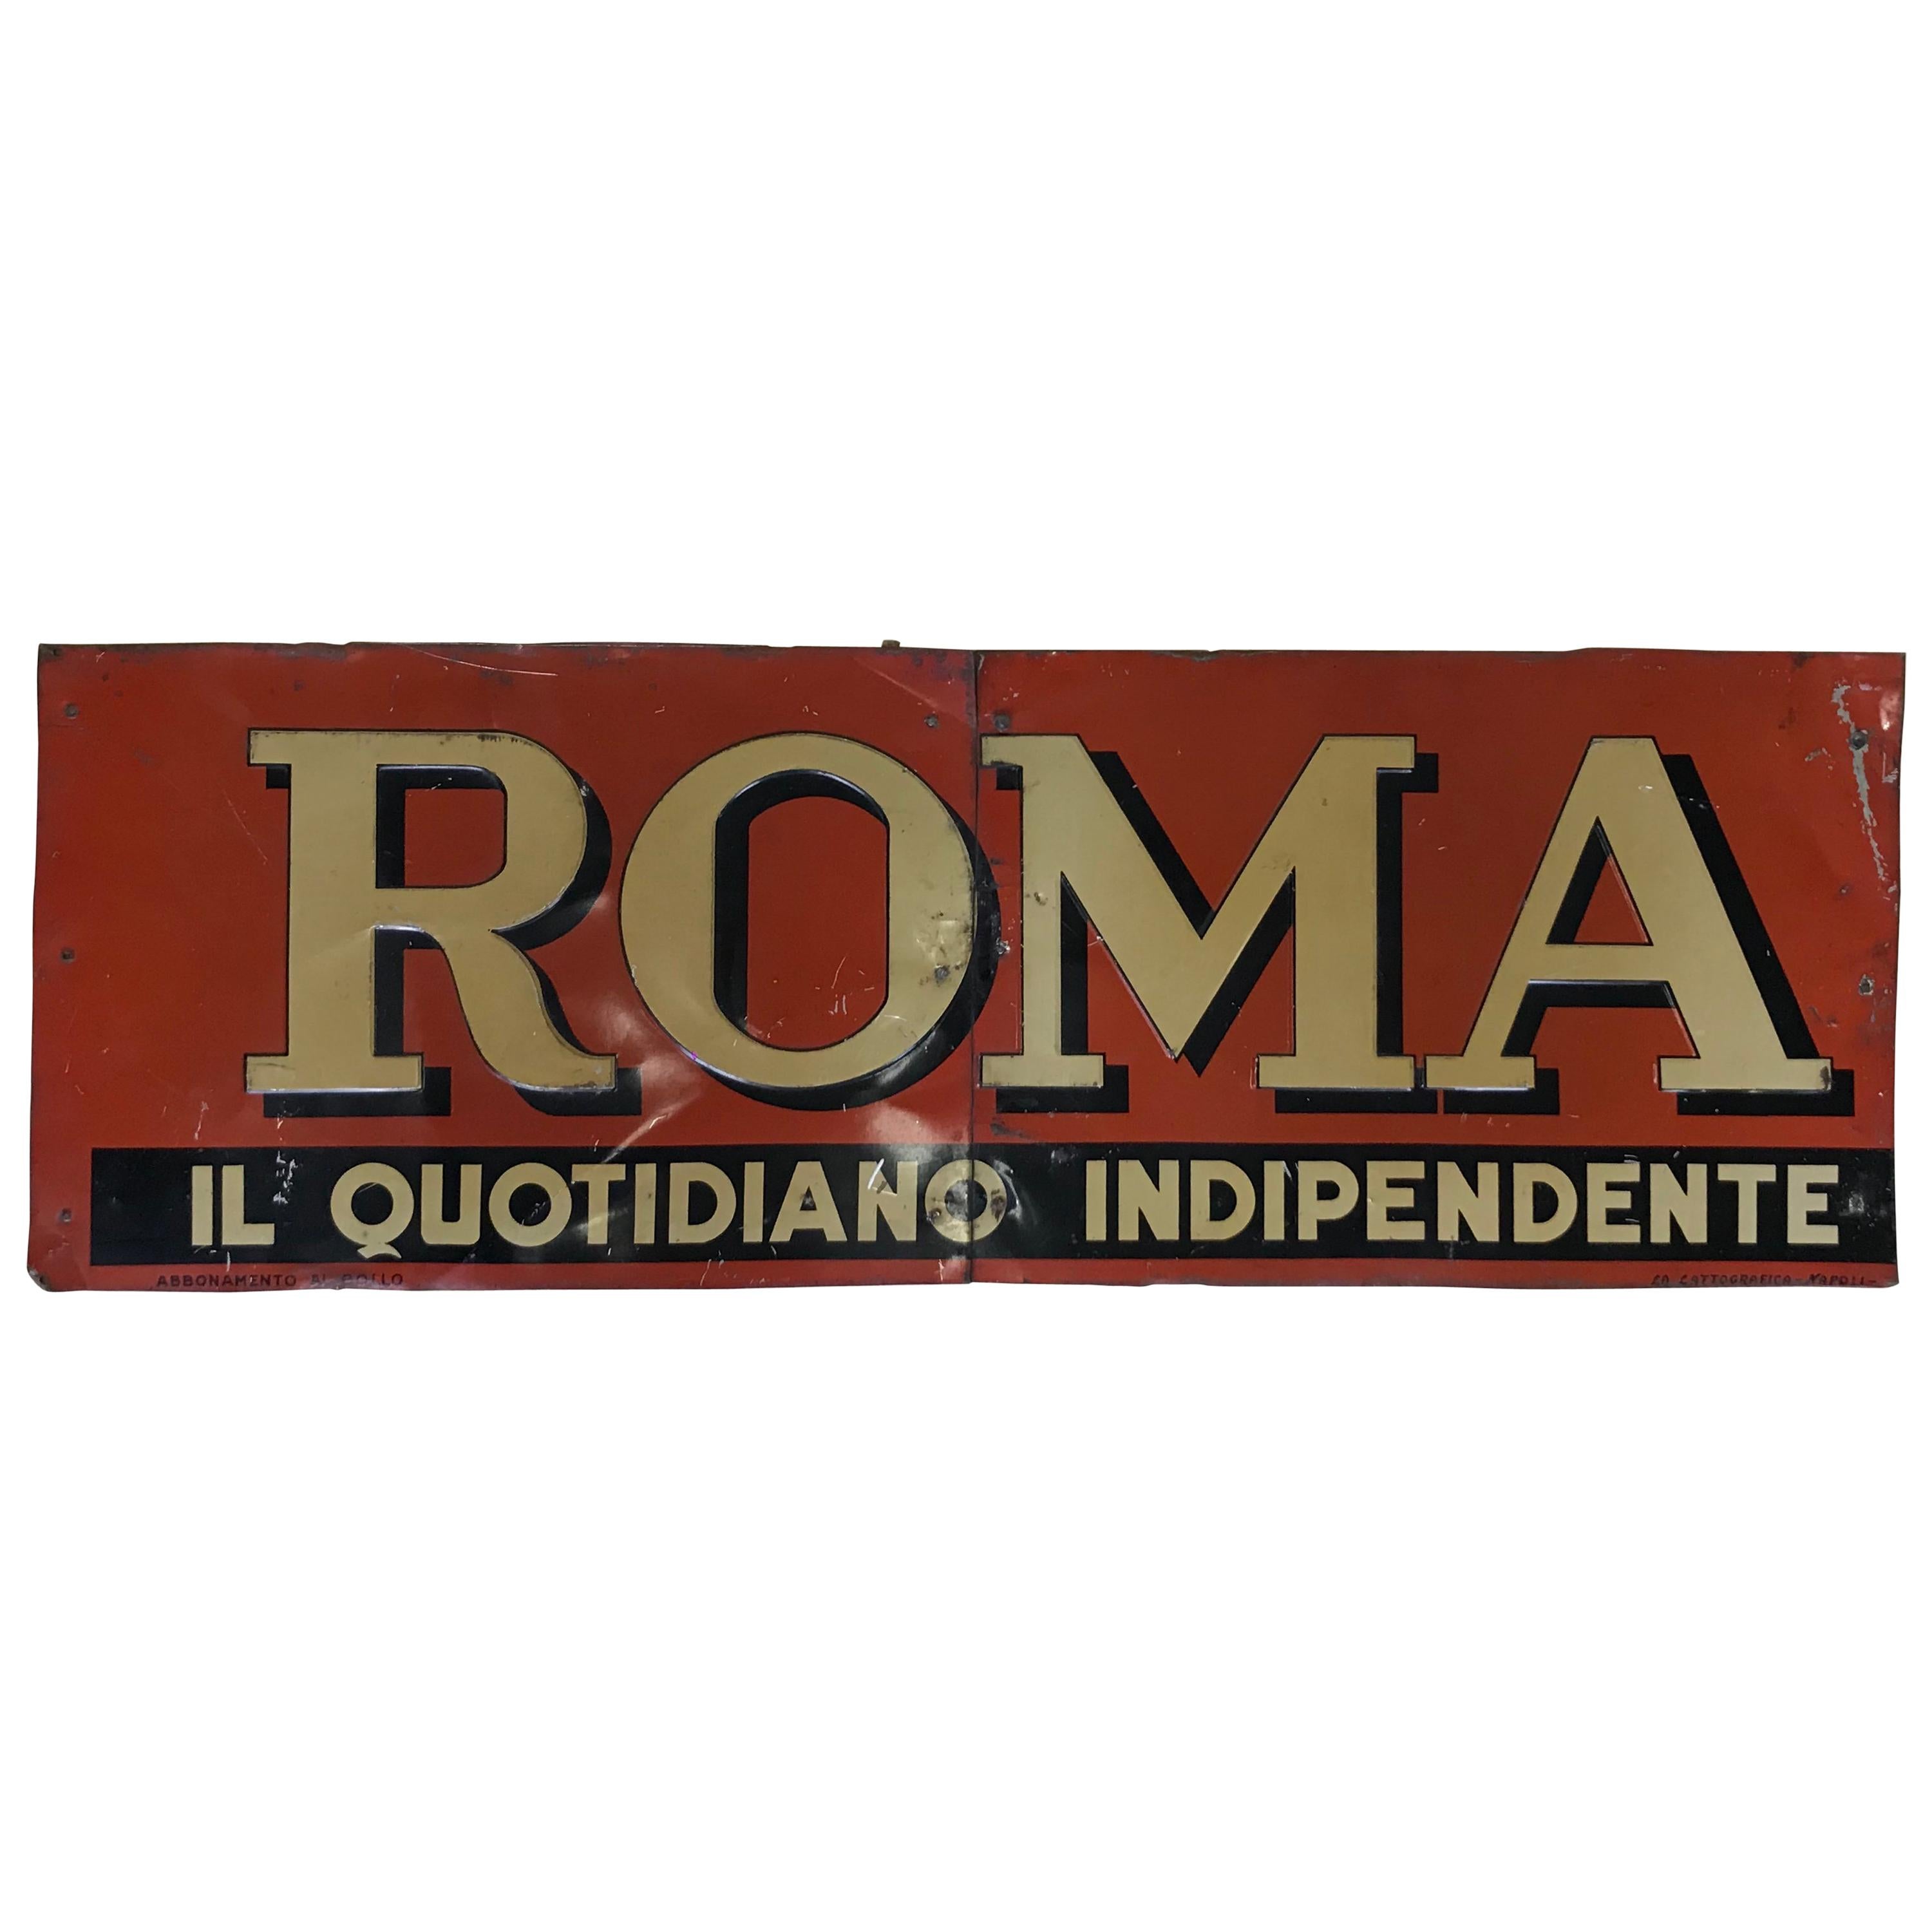 1950s Italian Vintage Transferpinted Red and Cream Roma Newspaper Sign